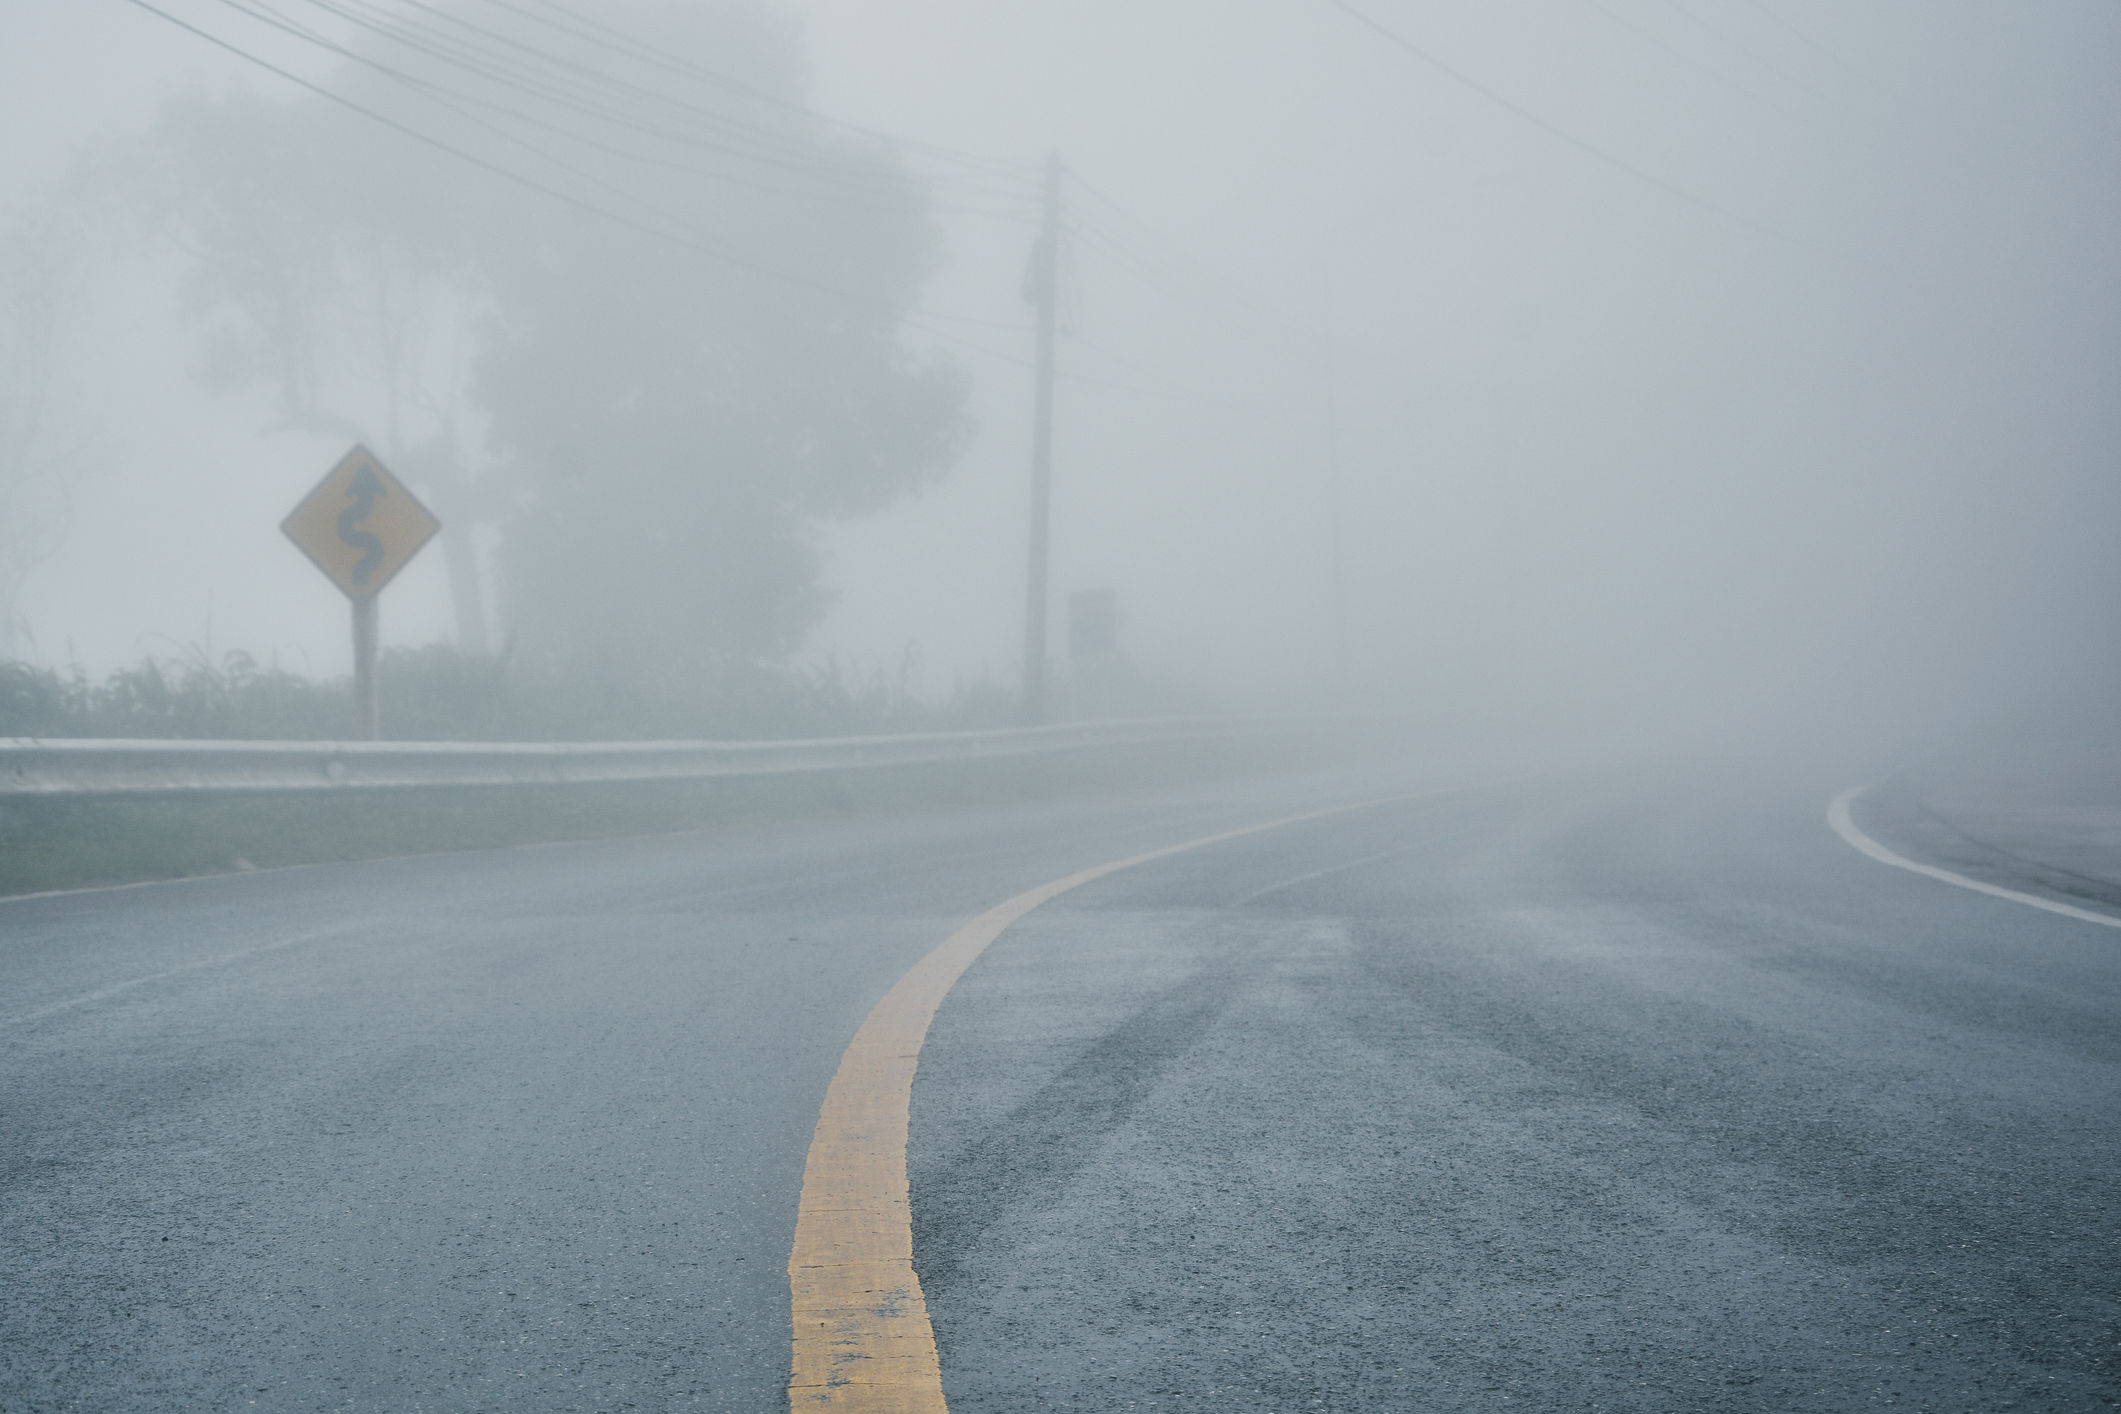 Dense fog advisory issued for WTOP listening area - WTOP News